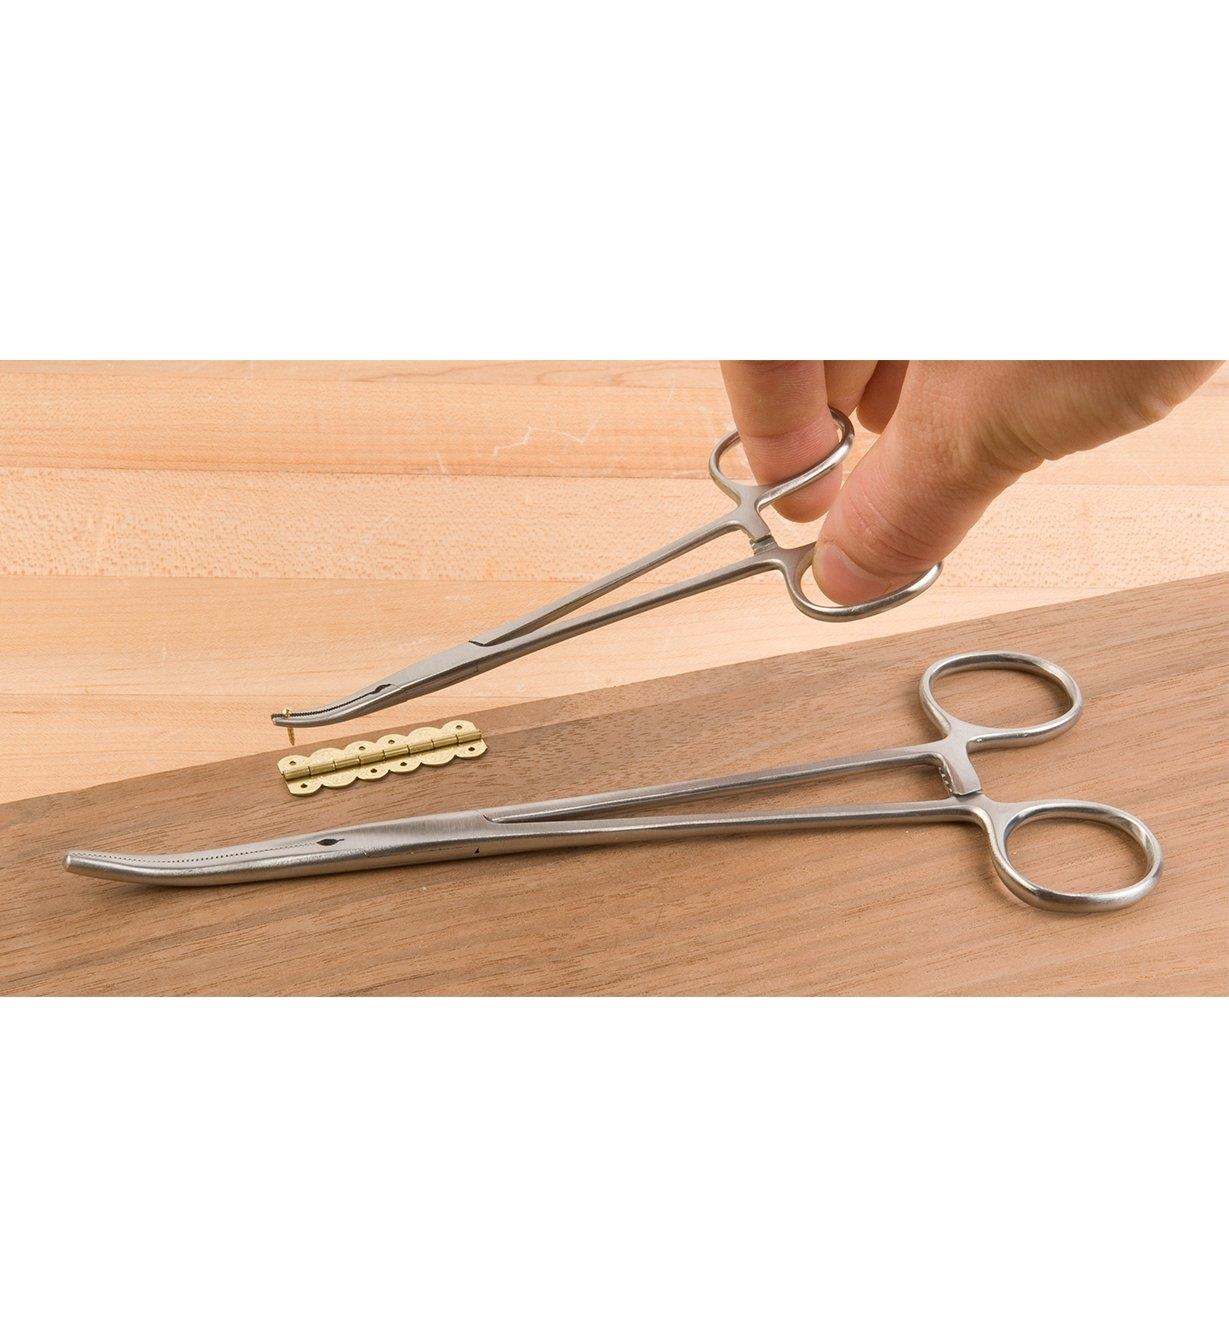 Using Offset Forceps to grip a small hinge nail for starting